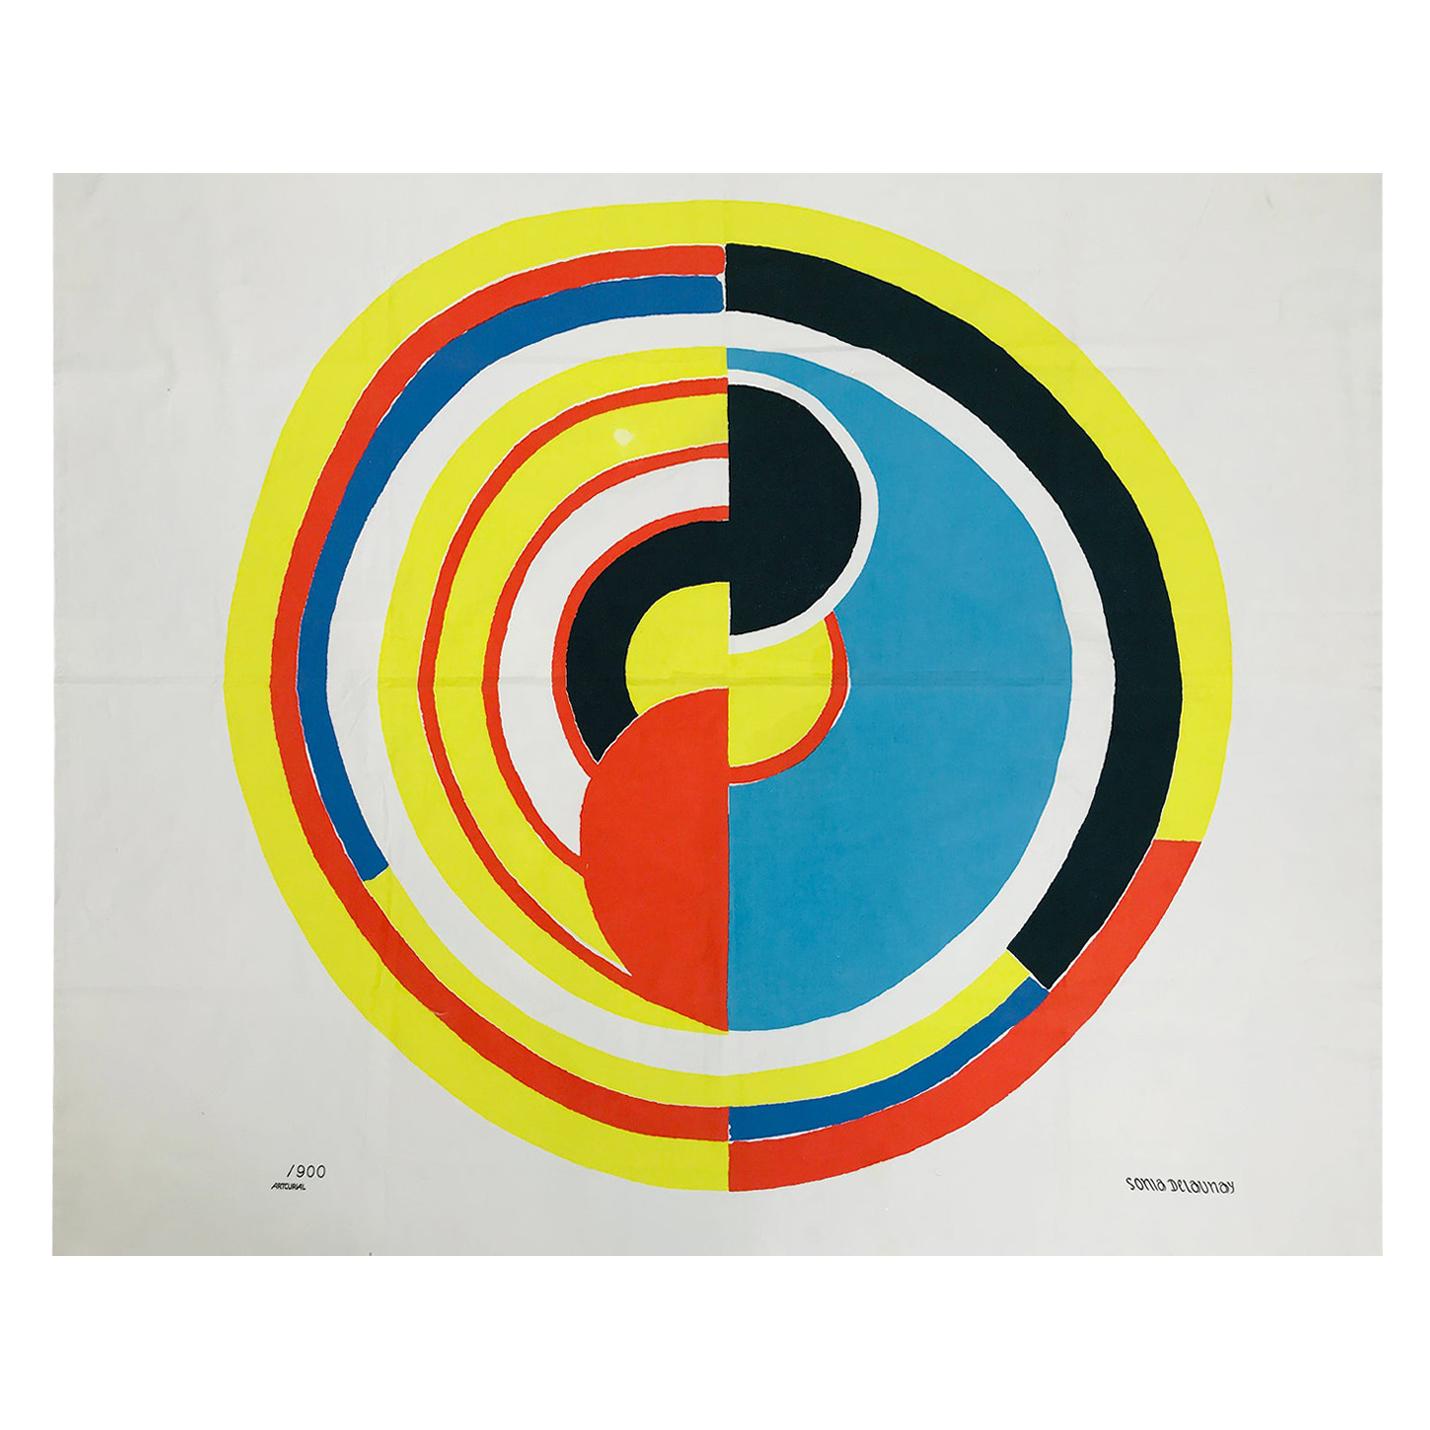   Sonia Delaunay "Signal" Printed Canvas by Bianchini Férier for Artcurial 20thC